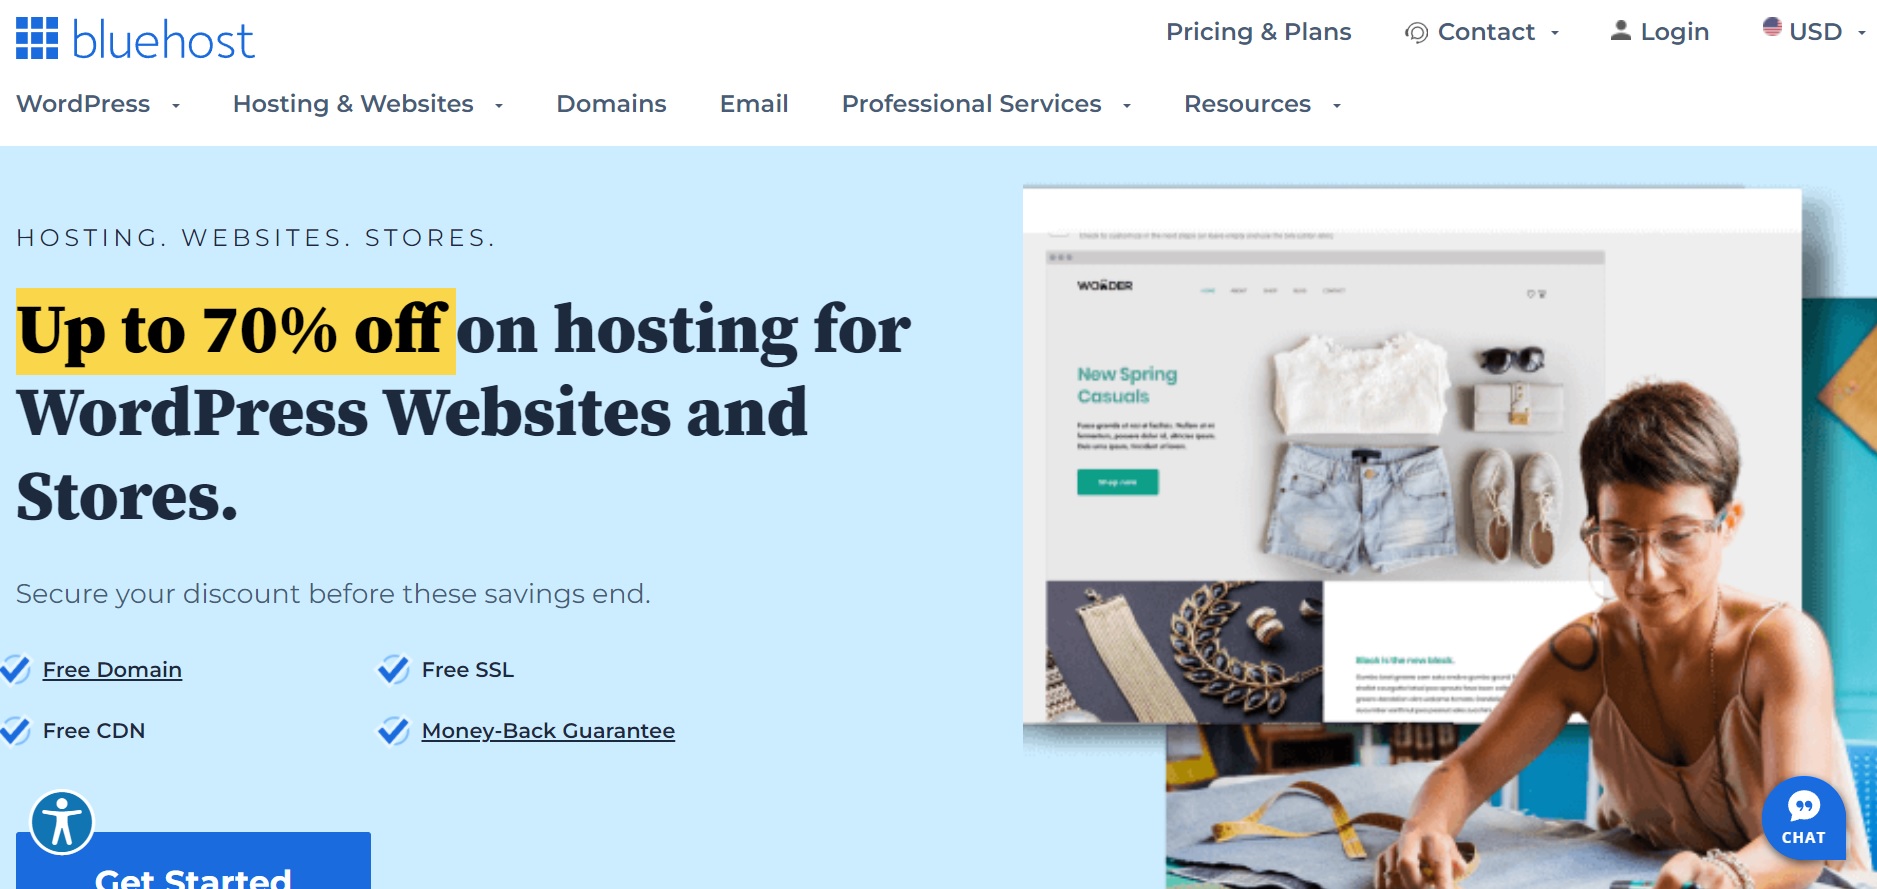 Bluehost - Right Website Hosting Provider for Yacht Management Companies